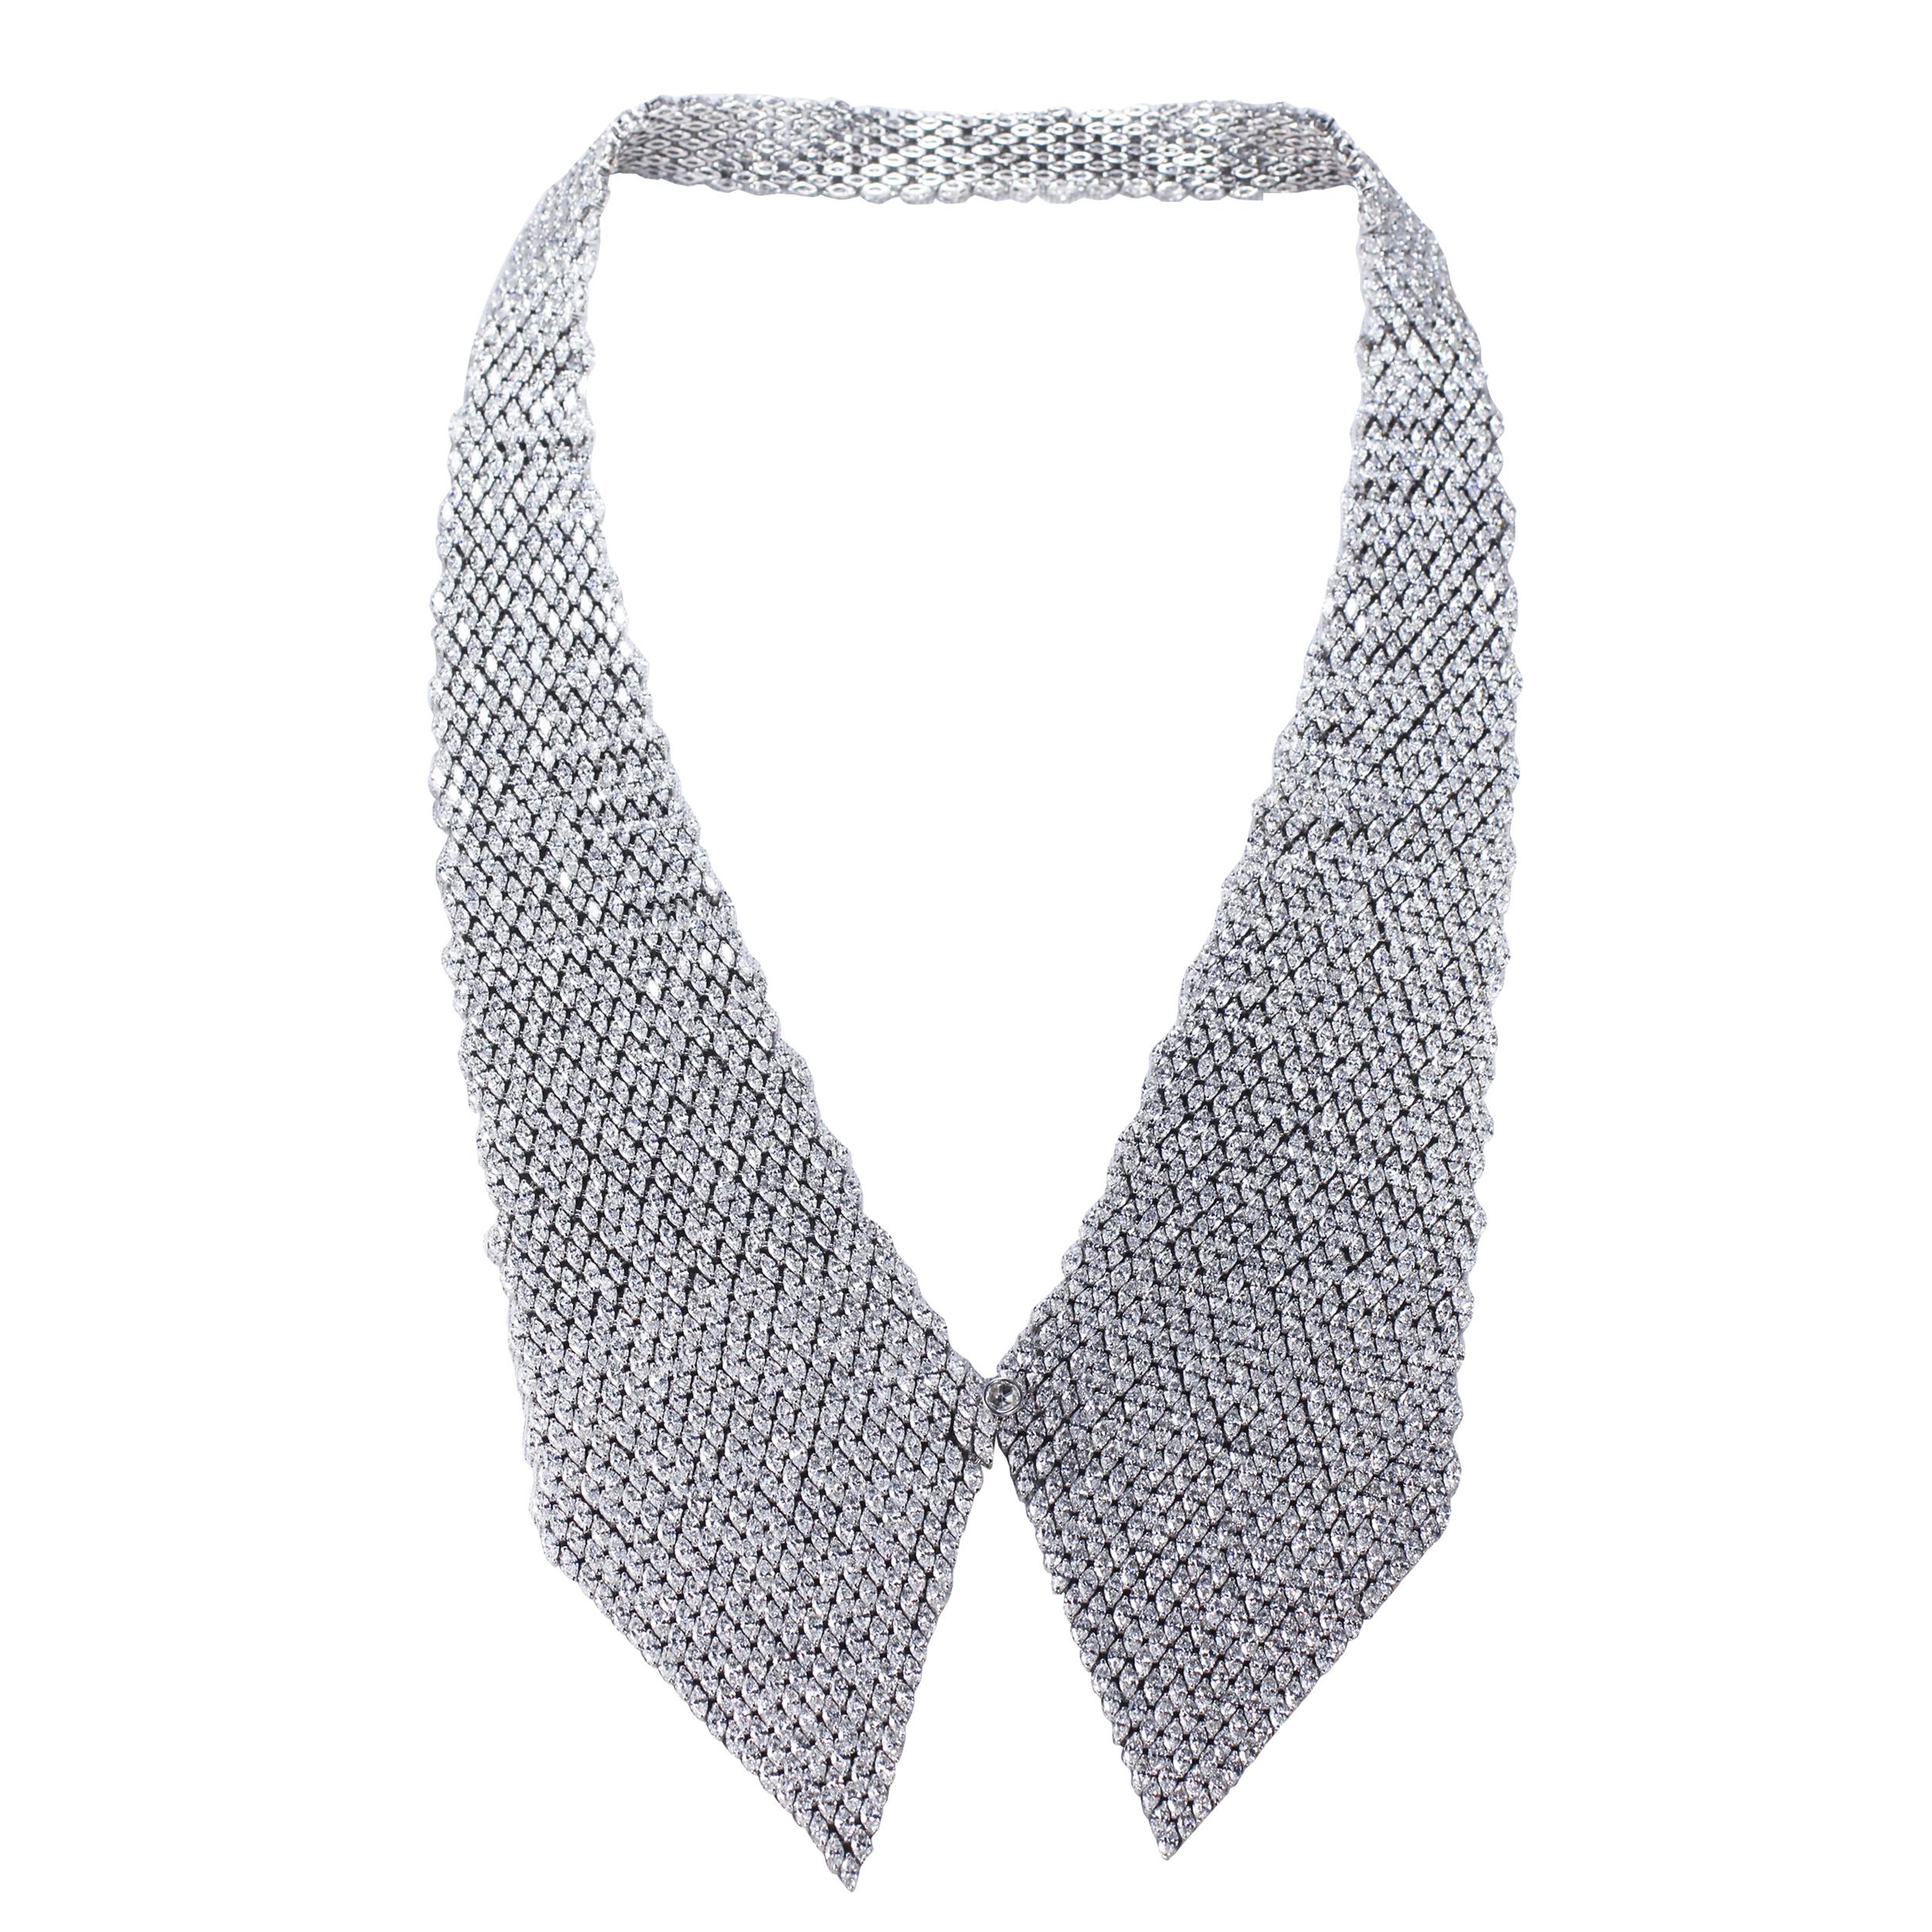 F-G/ VS Marquise Diamond Collar Scarf Necklace

This maximalist statement necklace, quite literally, doubles as a collar. The dazzling piece is handcrafted with 2,176 sparkling marquise diamonds in a prong setting on an 18K white gold base. A pièce